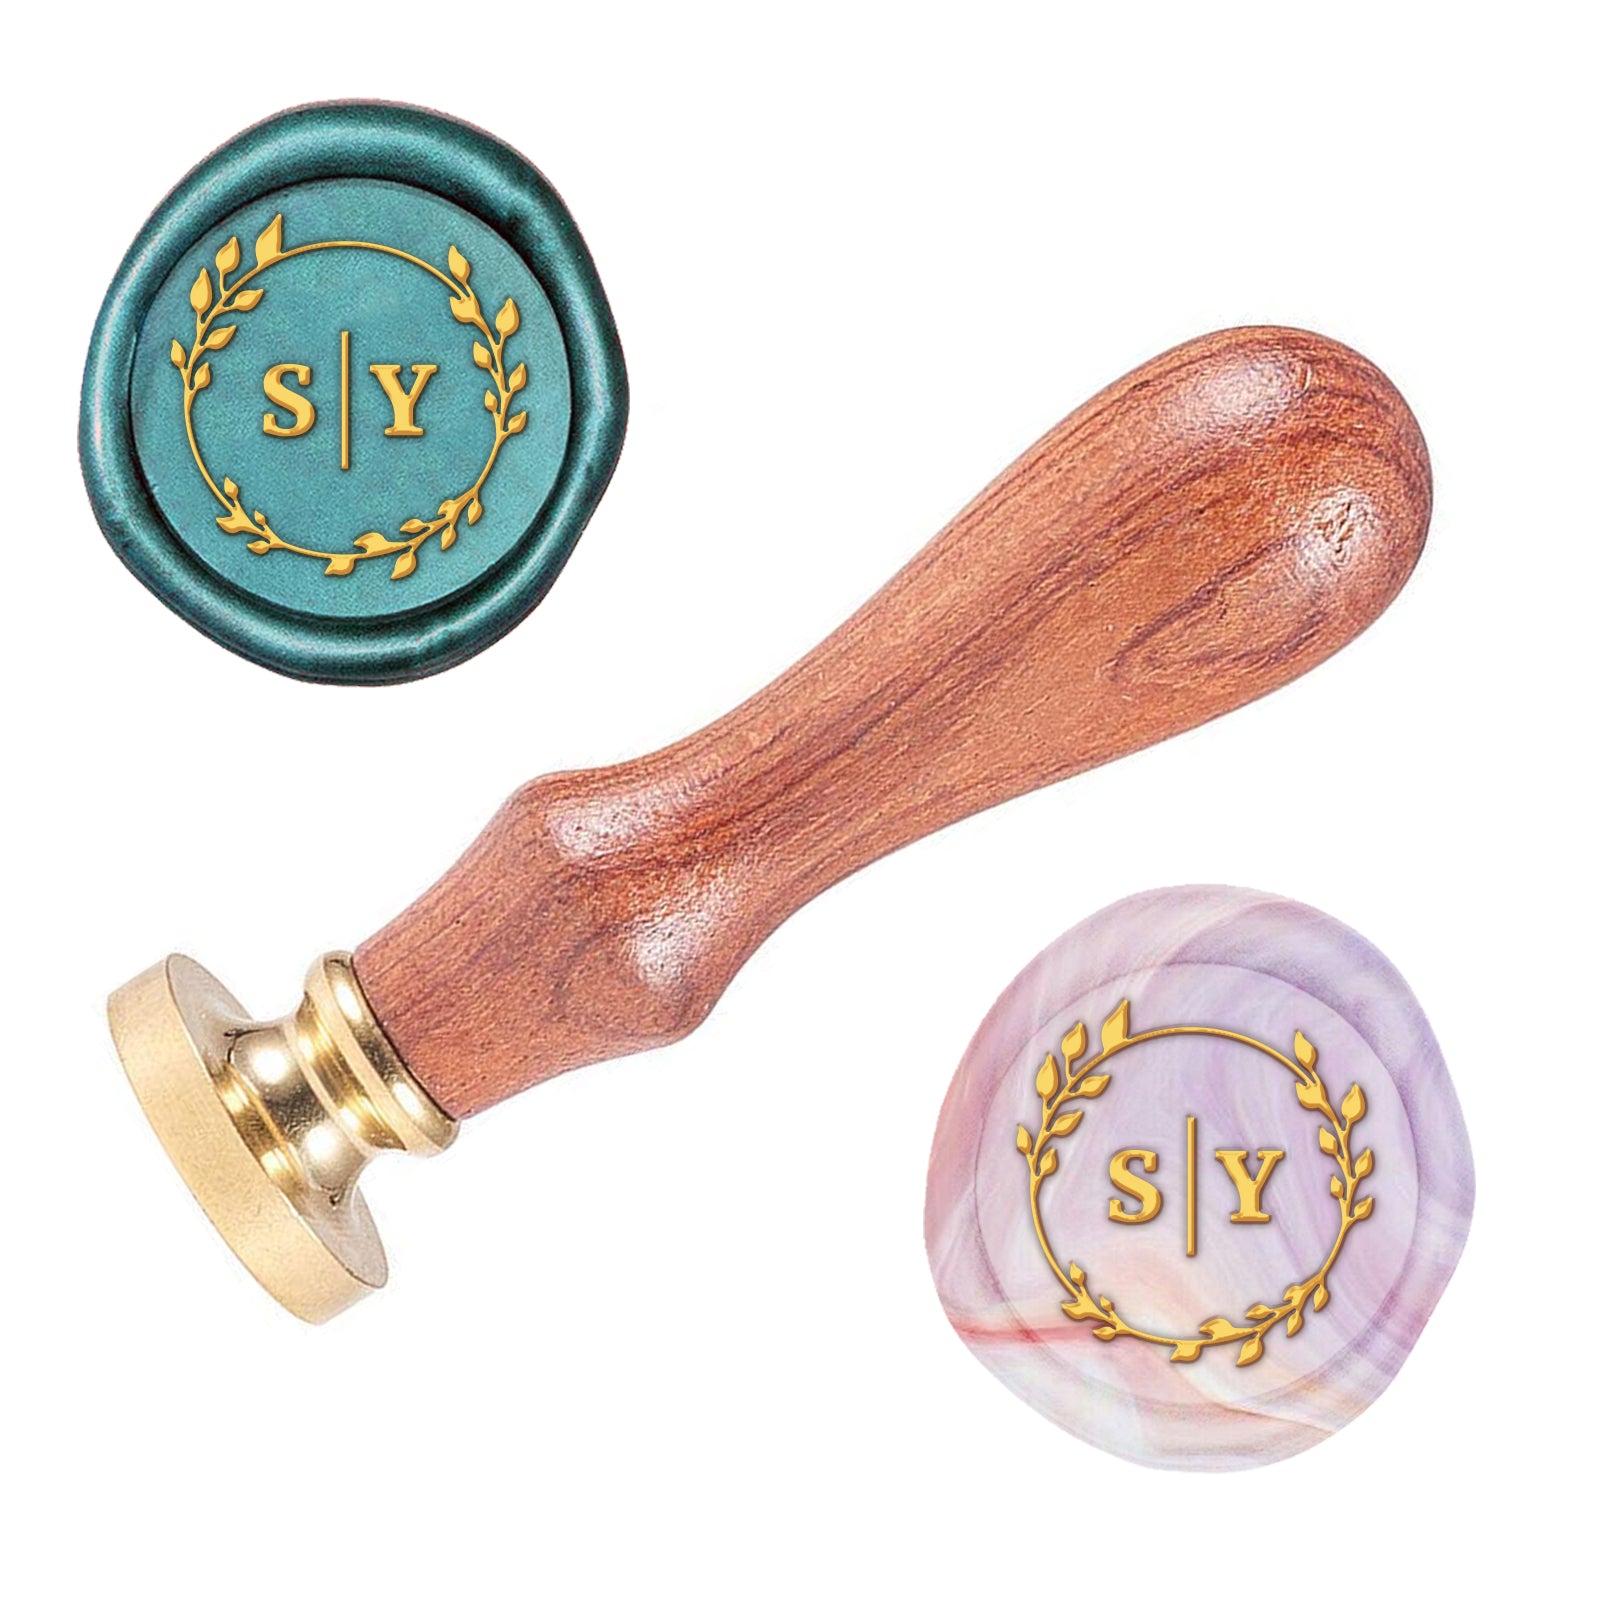 Letter S&Y Wood Handle Wax Seal Stamp